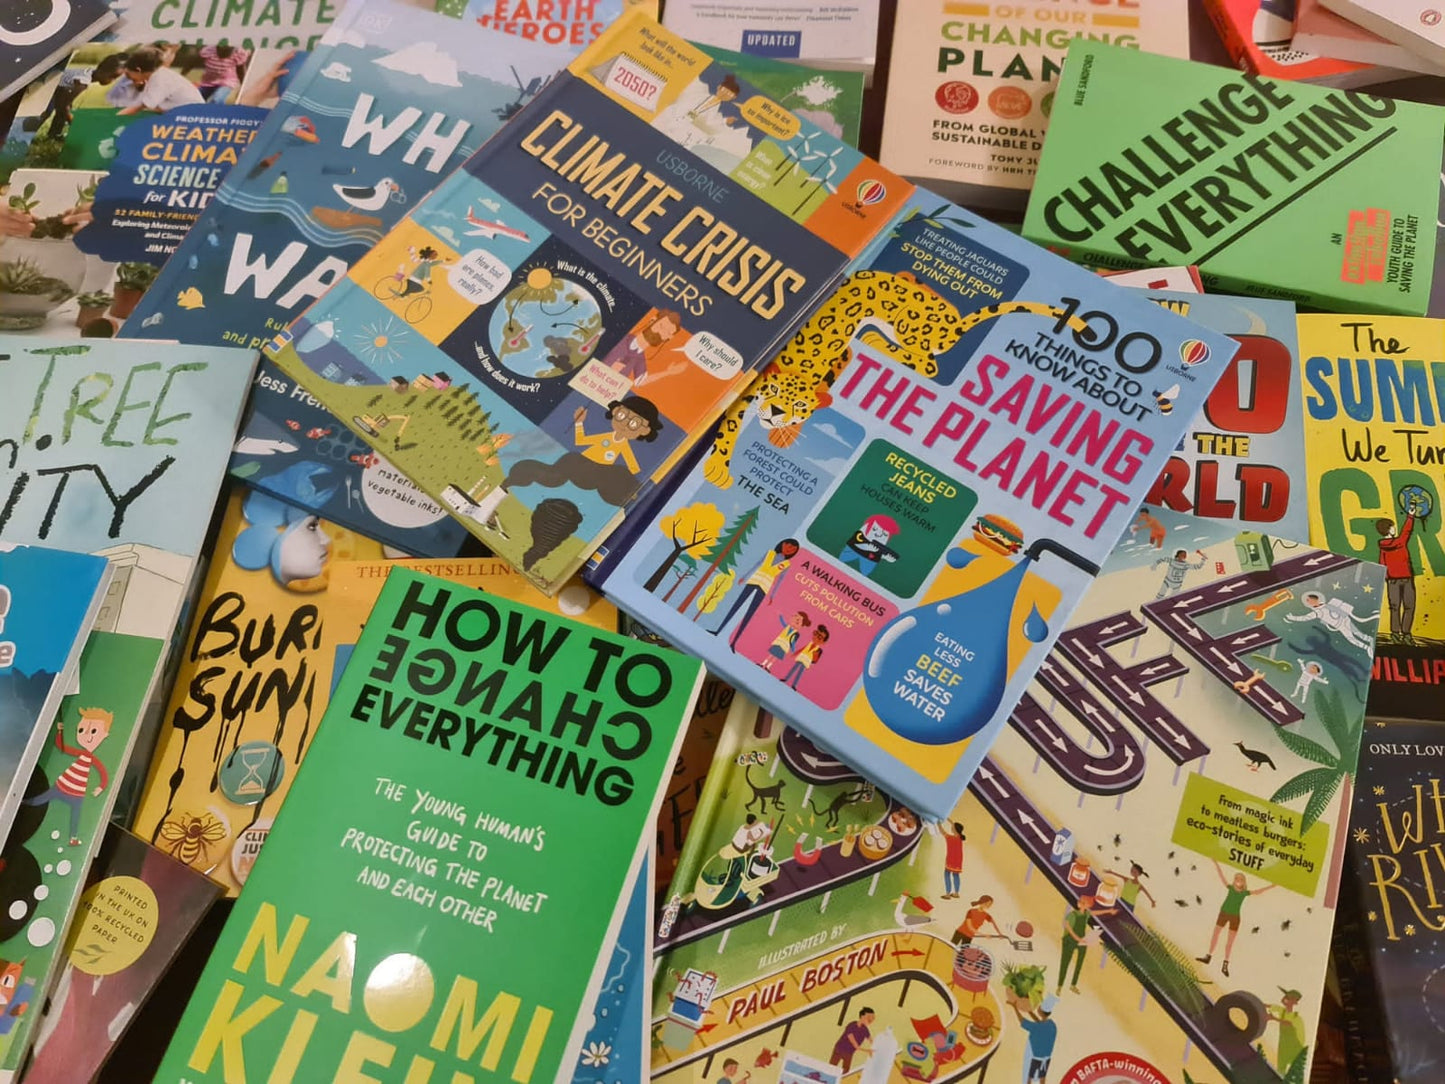 Key Stage 2 (Age 7-11) Non-Fiction Climate & Environment Book Collection 46 Books